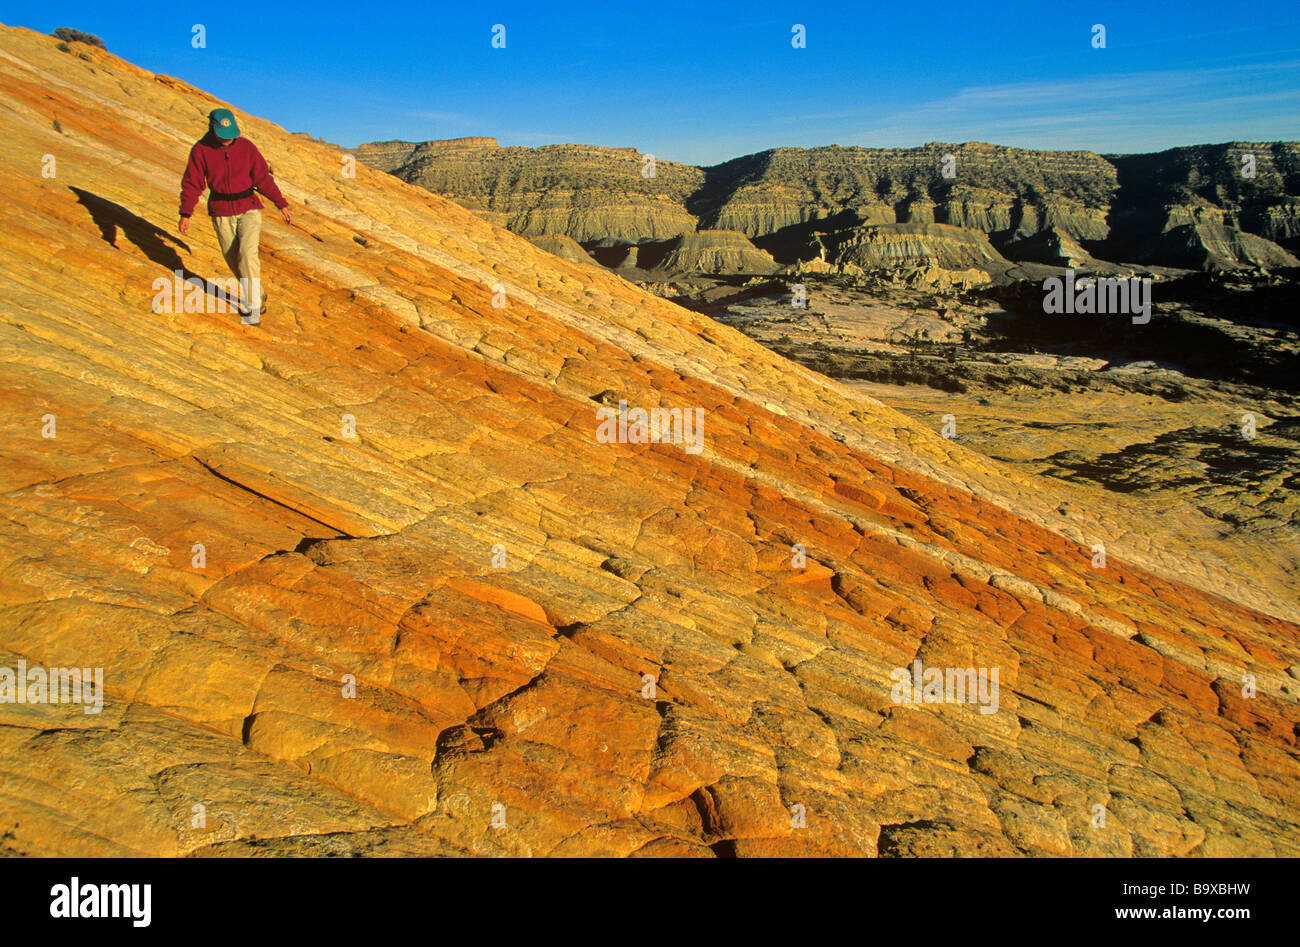 Hiking on Sandstone the Coxcomb area of Grand Staircase Escalante National Monument Utah Stock Photo